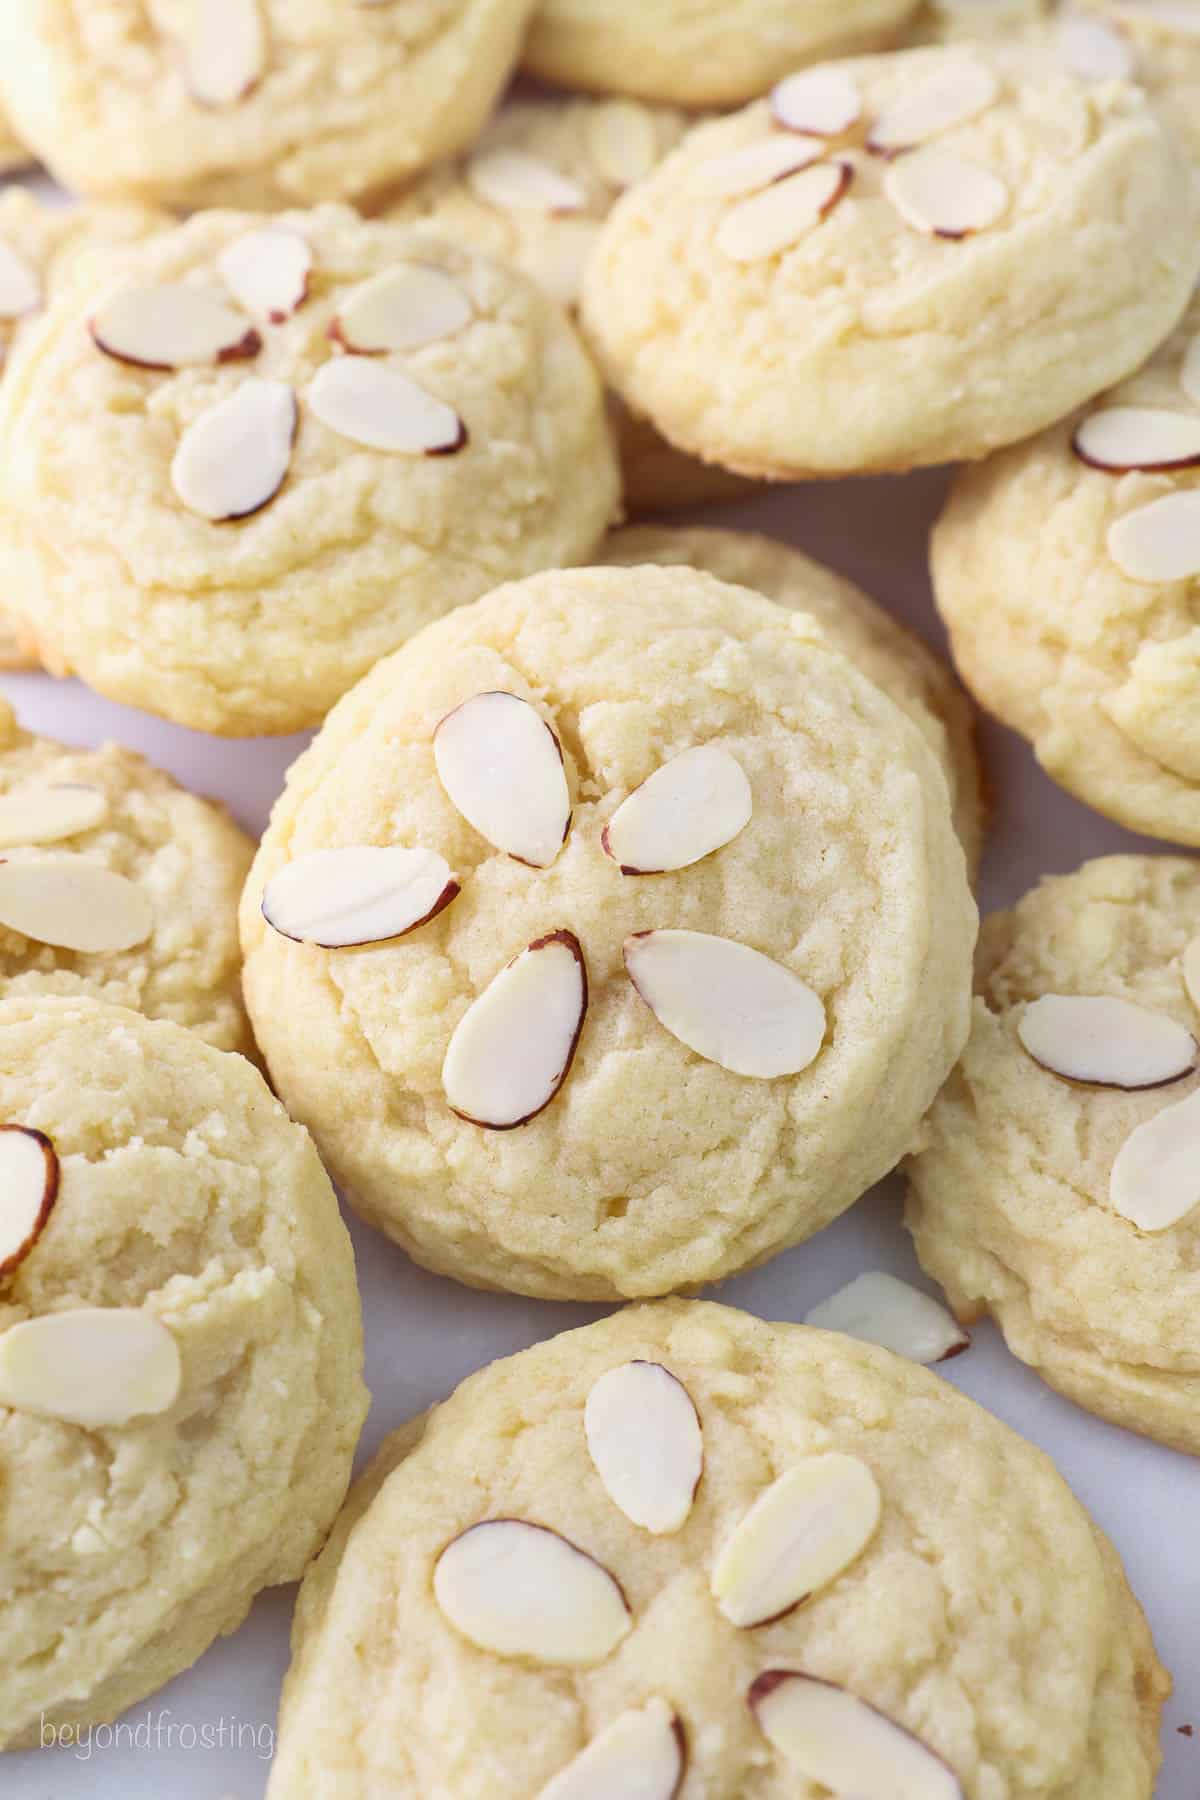 Assorted baked almond cookies decorated with slivered almonds.